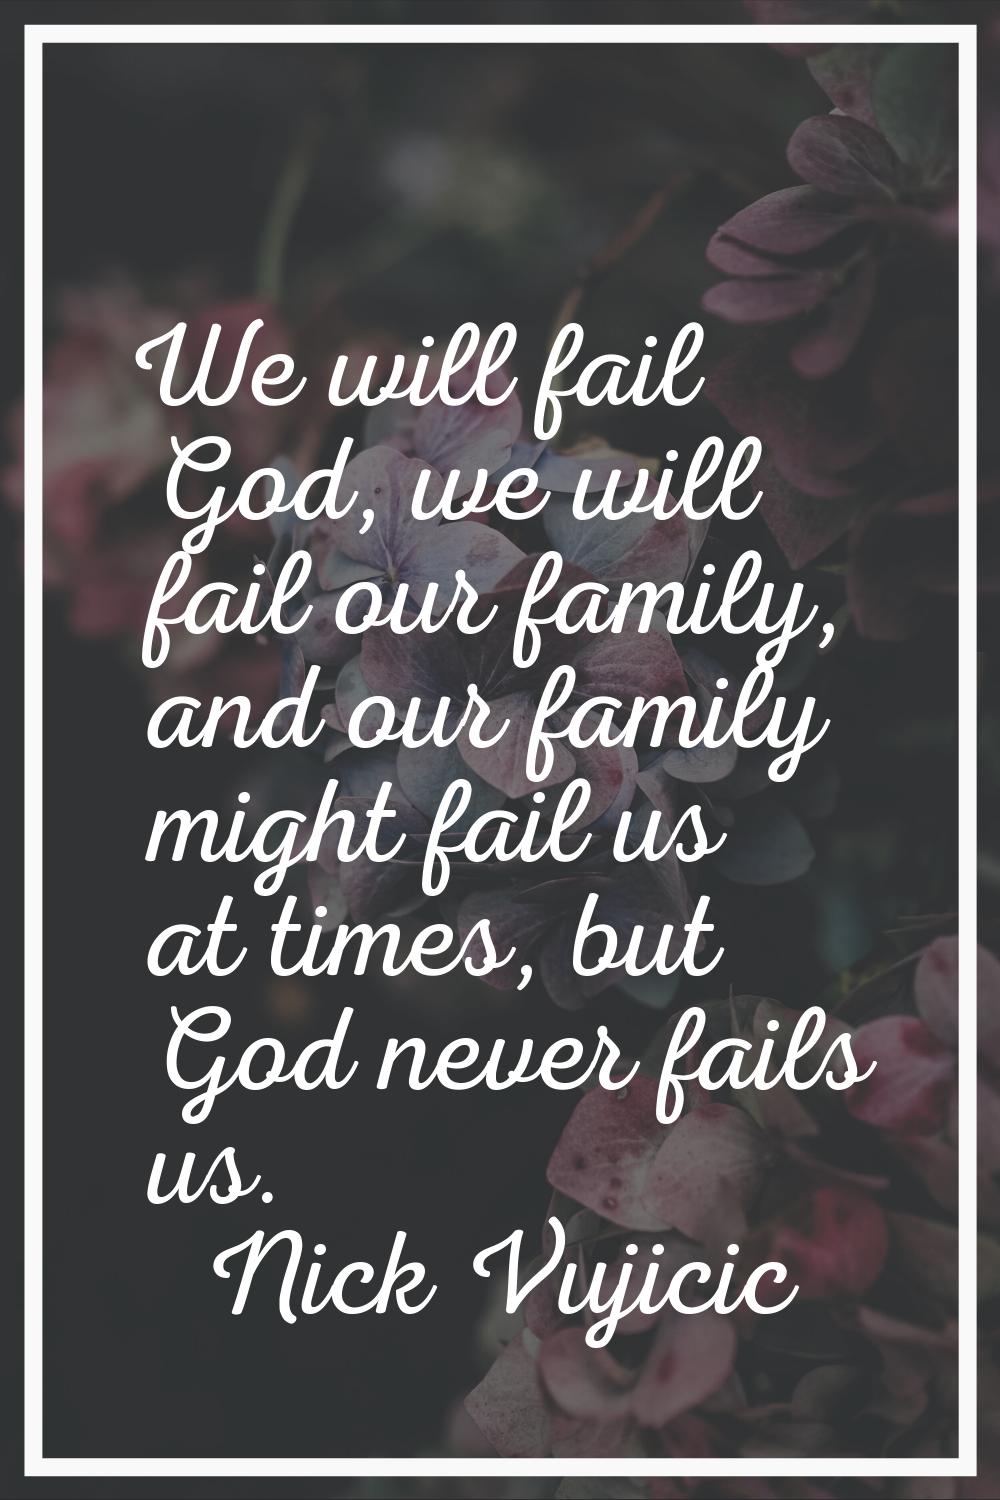 We will fail God, we will fail our family, and our family might fail us at times, but God never fai